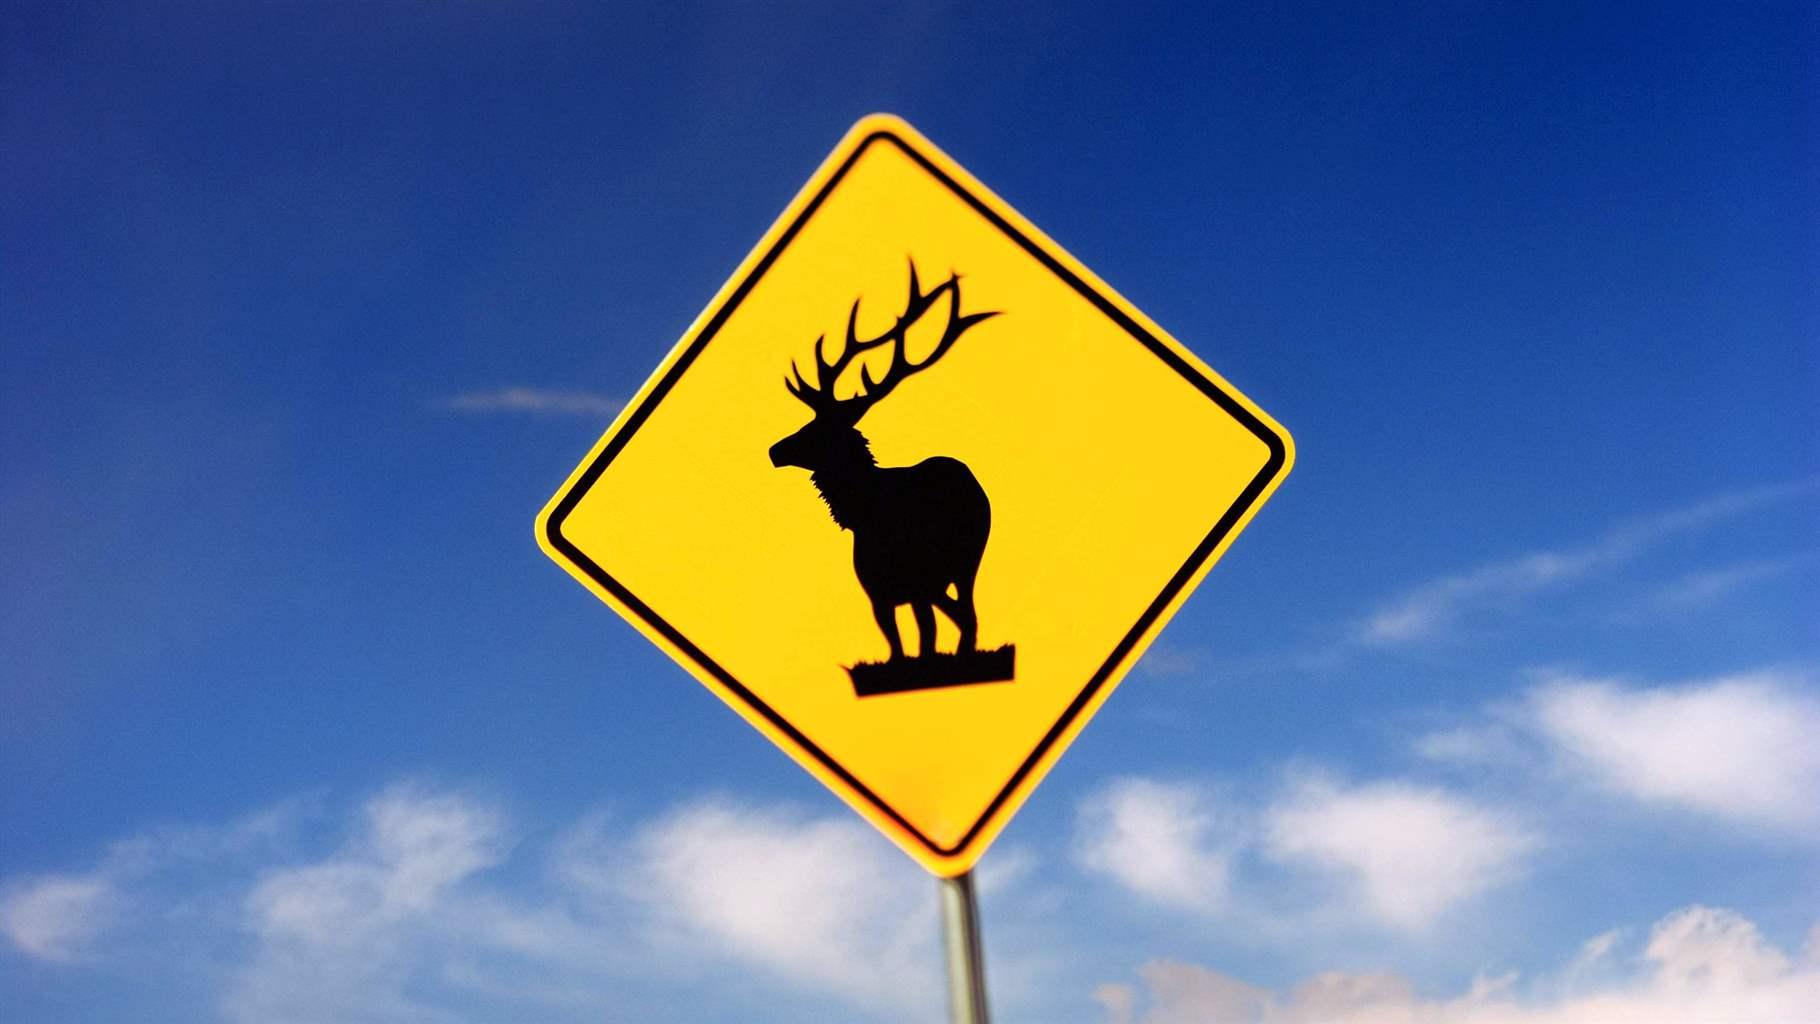 Signs like this one in Colorado help warn motorists of the potential for wildlife on roads.